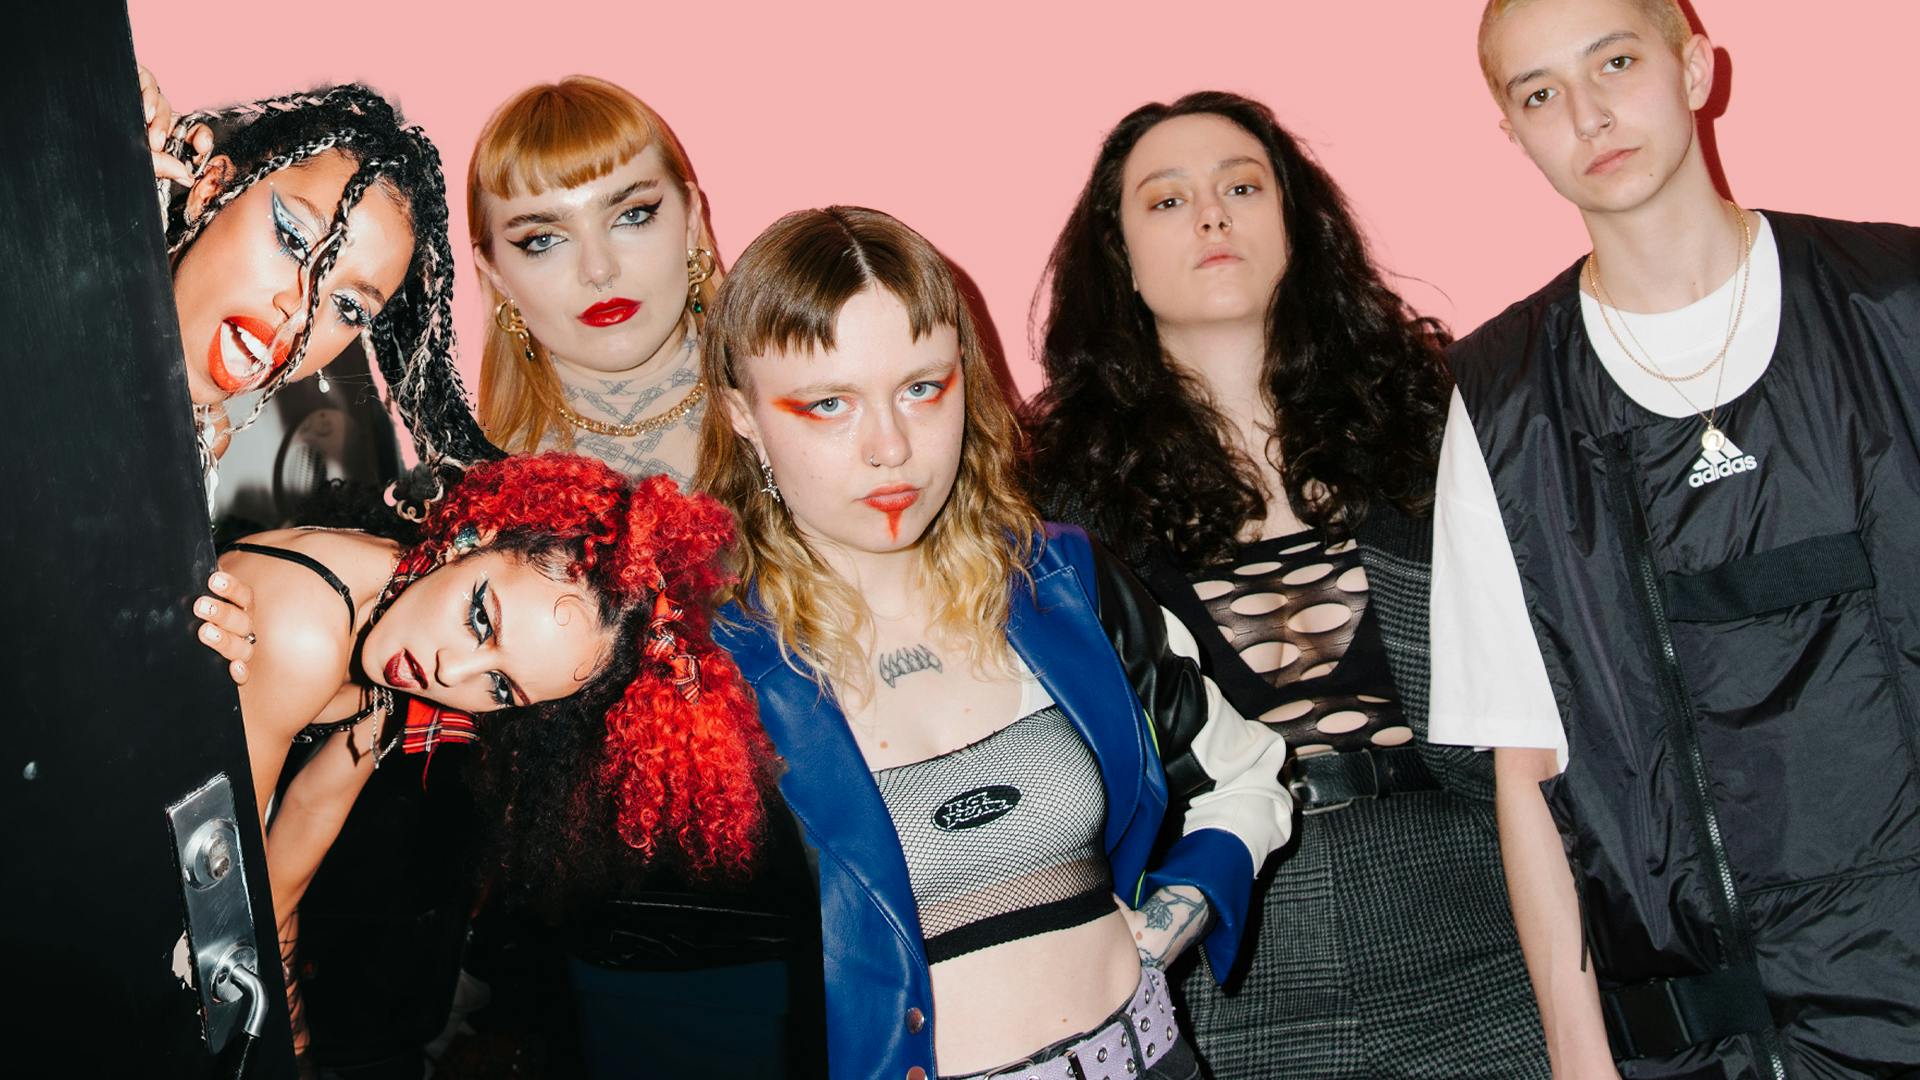 In conversation with Nova Twins and Witch Fever: “It doesn’t have to be tokenistic, there’s good acts out there if you just open your eyes!”